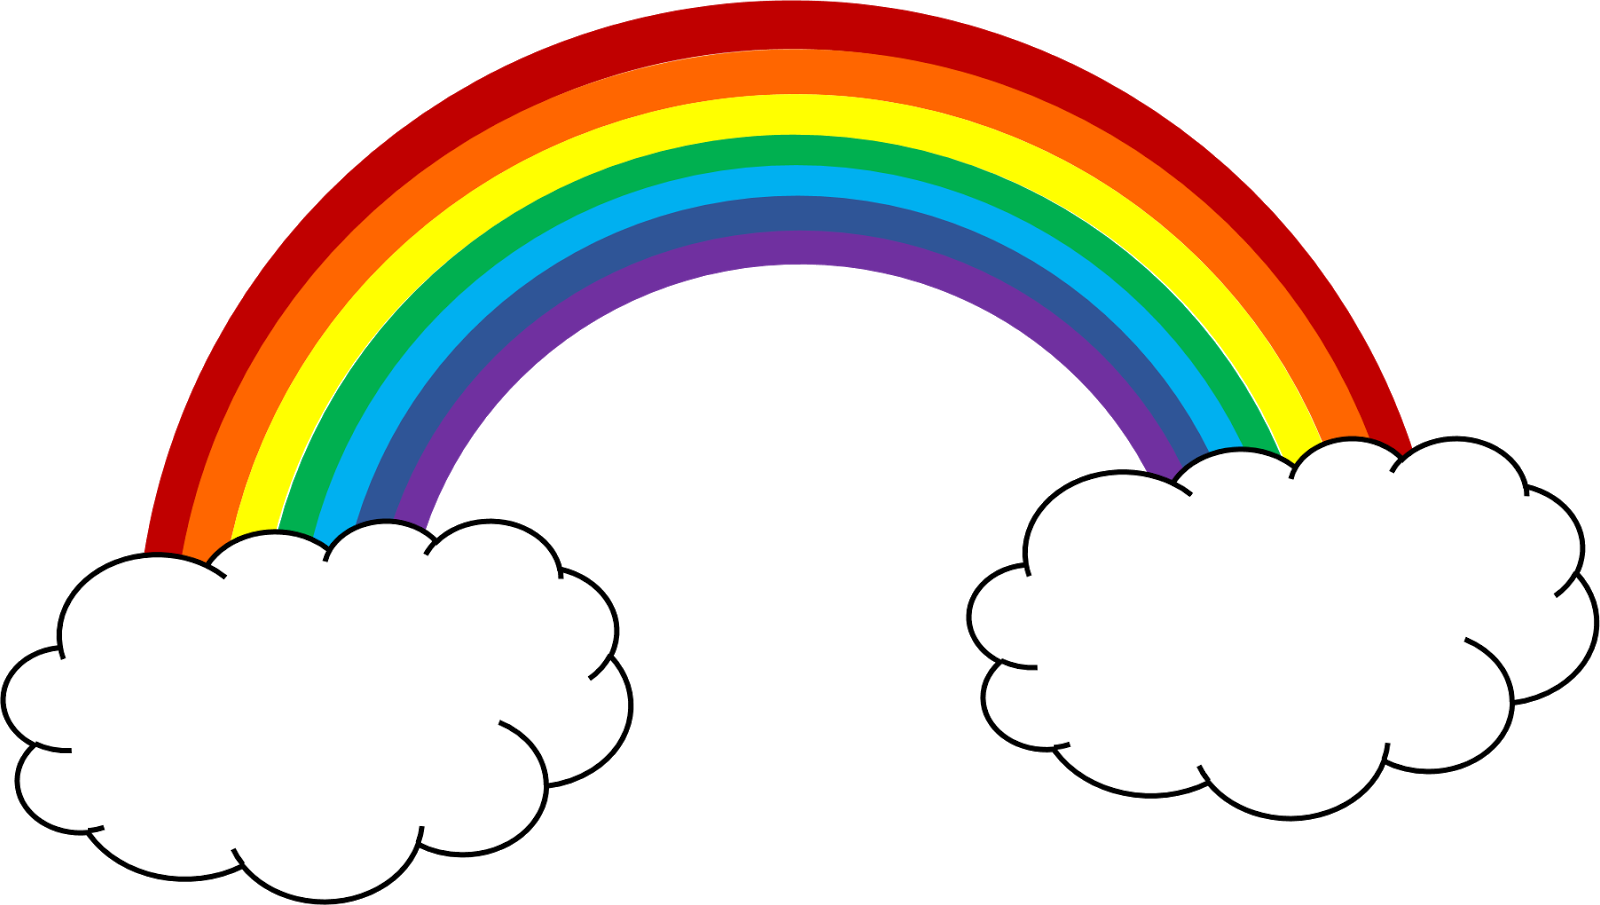 Free Rainbows Cliparts, Download Free Rainbows Cliparts png images